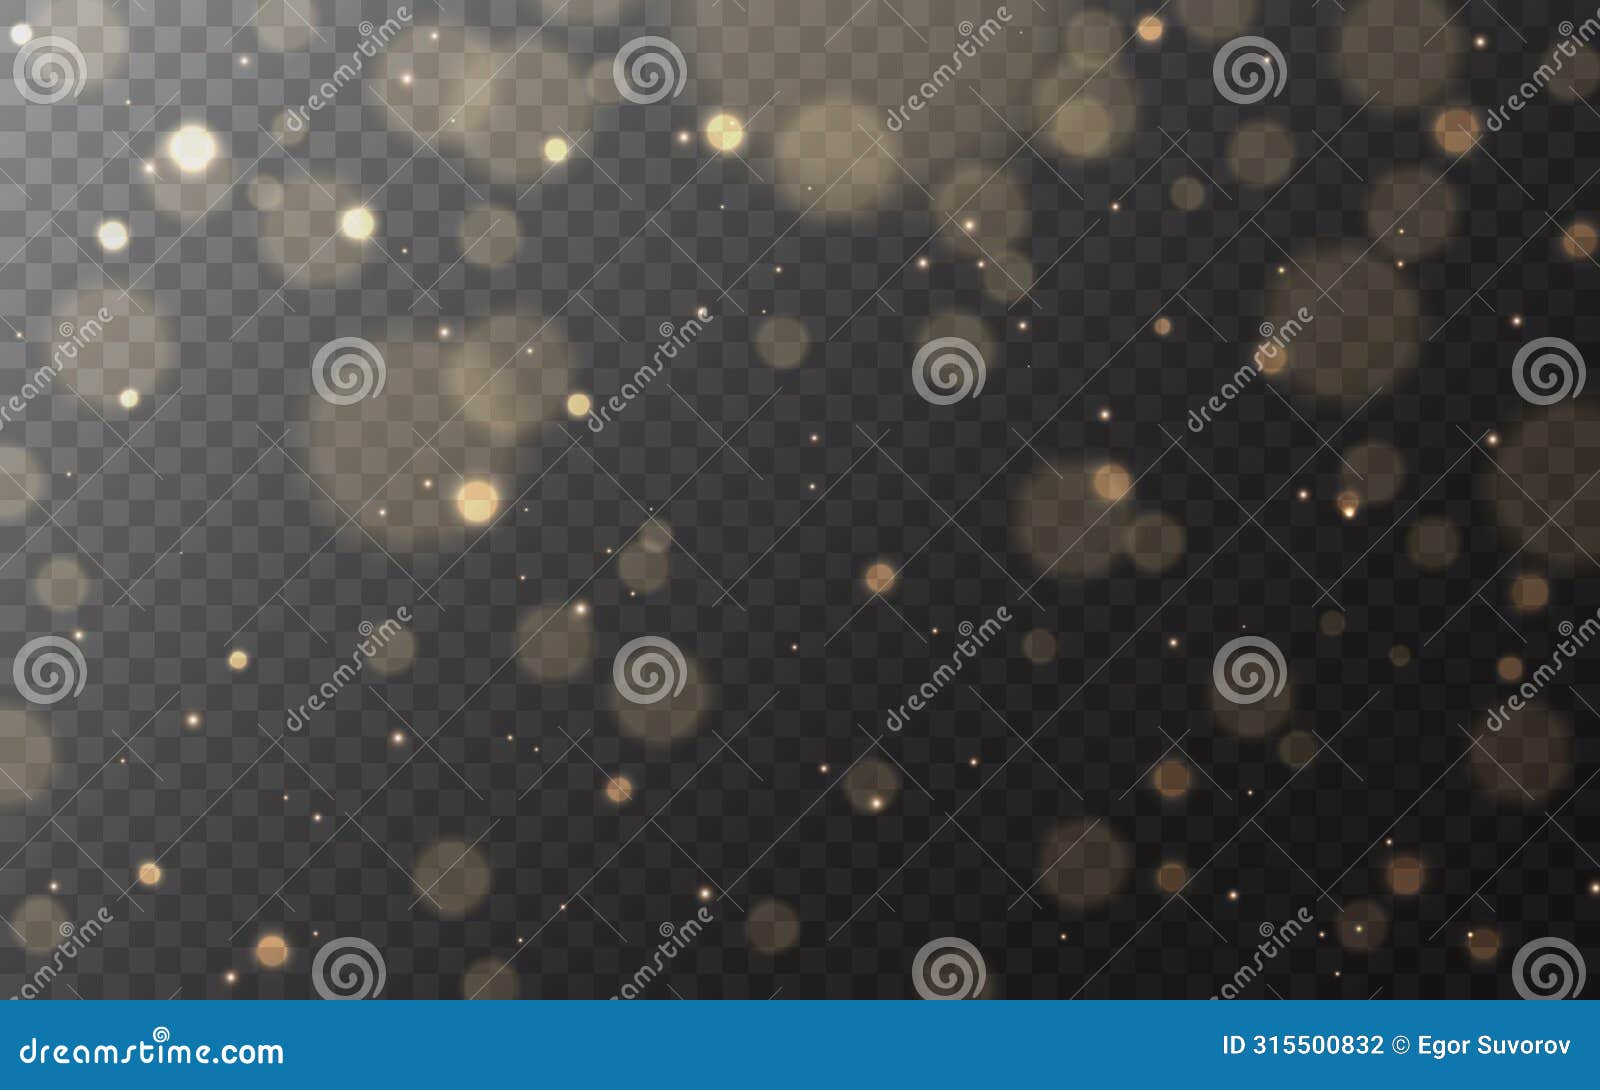 bokeh gold. shining particles and lights. bright circles on transparent background. glowing flares effect. warm sparks